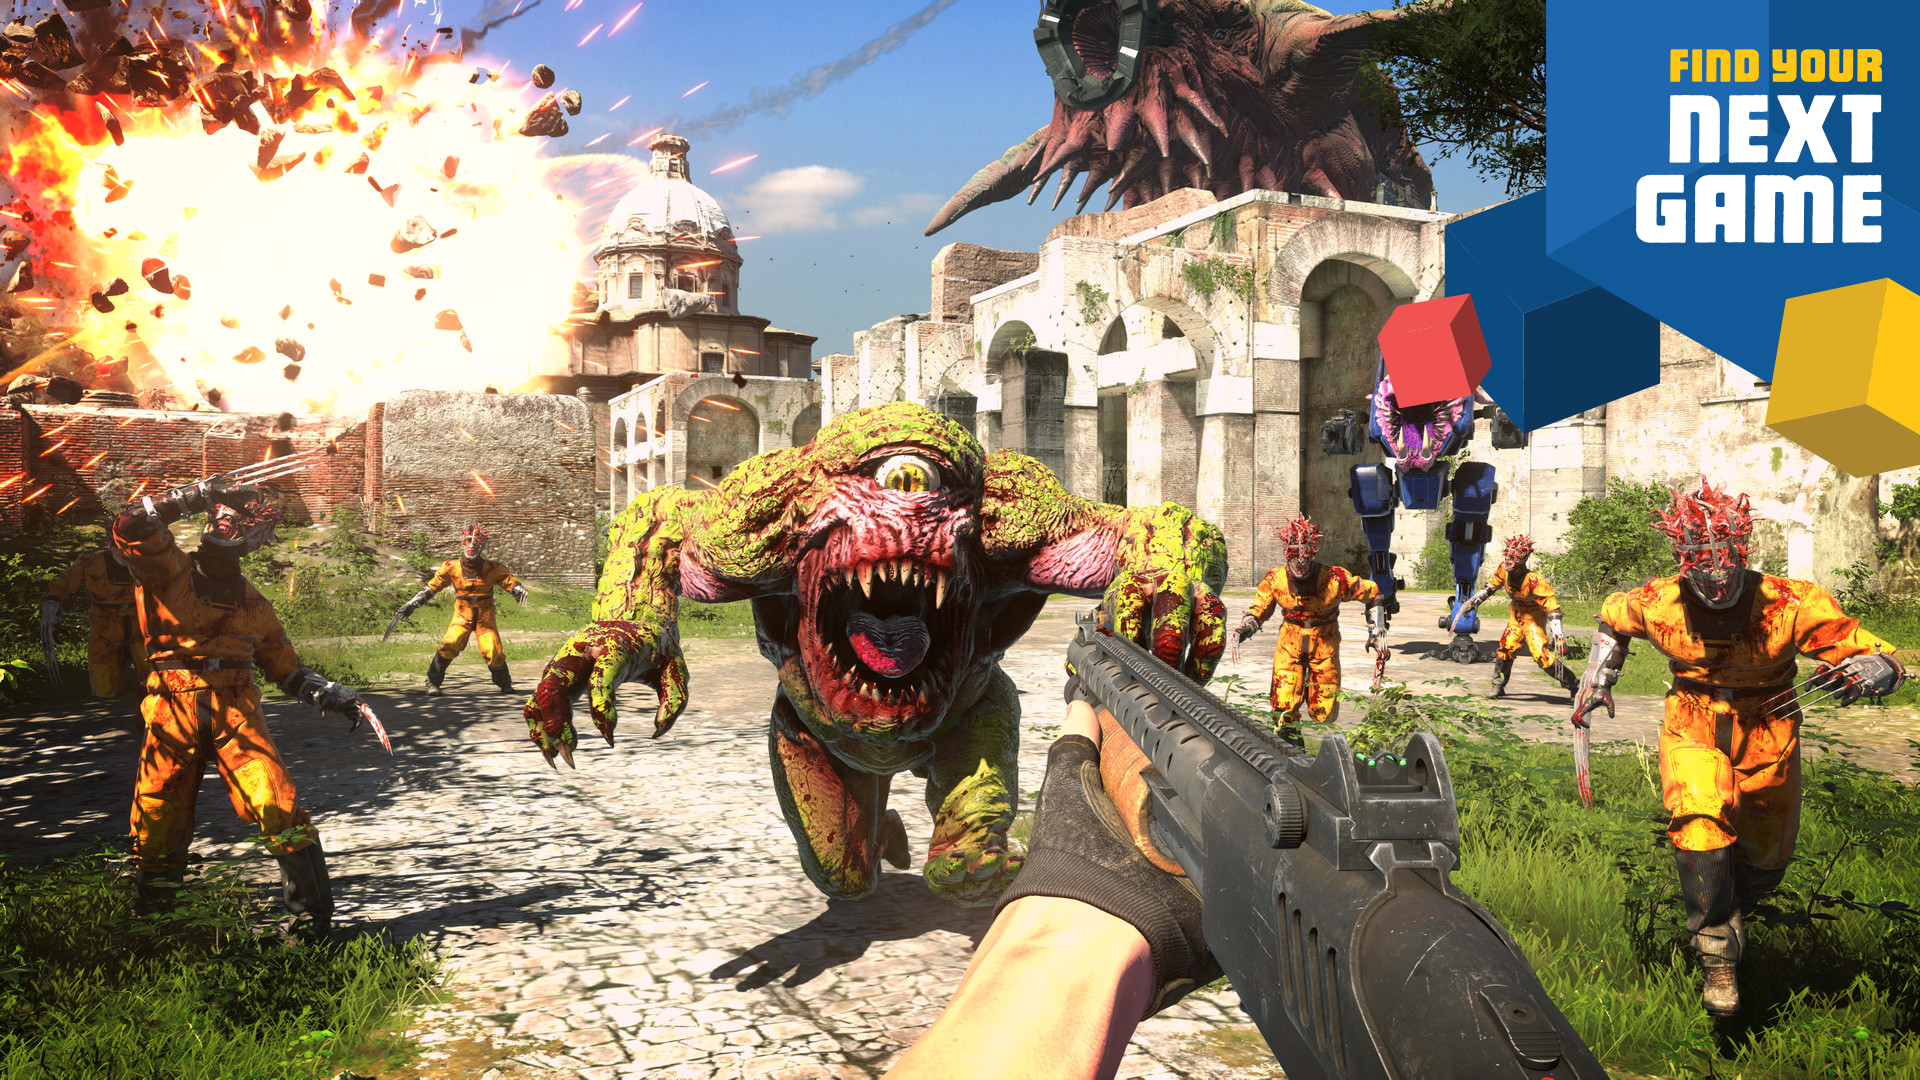 [Update] Serious Sam 4: Planet Badass will arrive next month on PC and Stadia